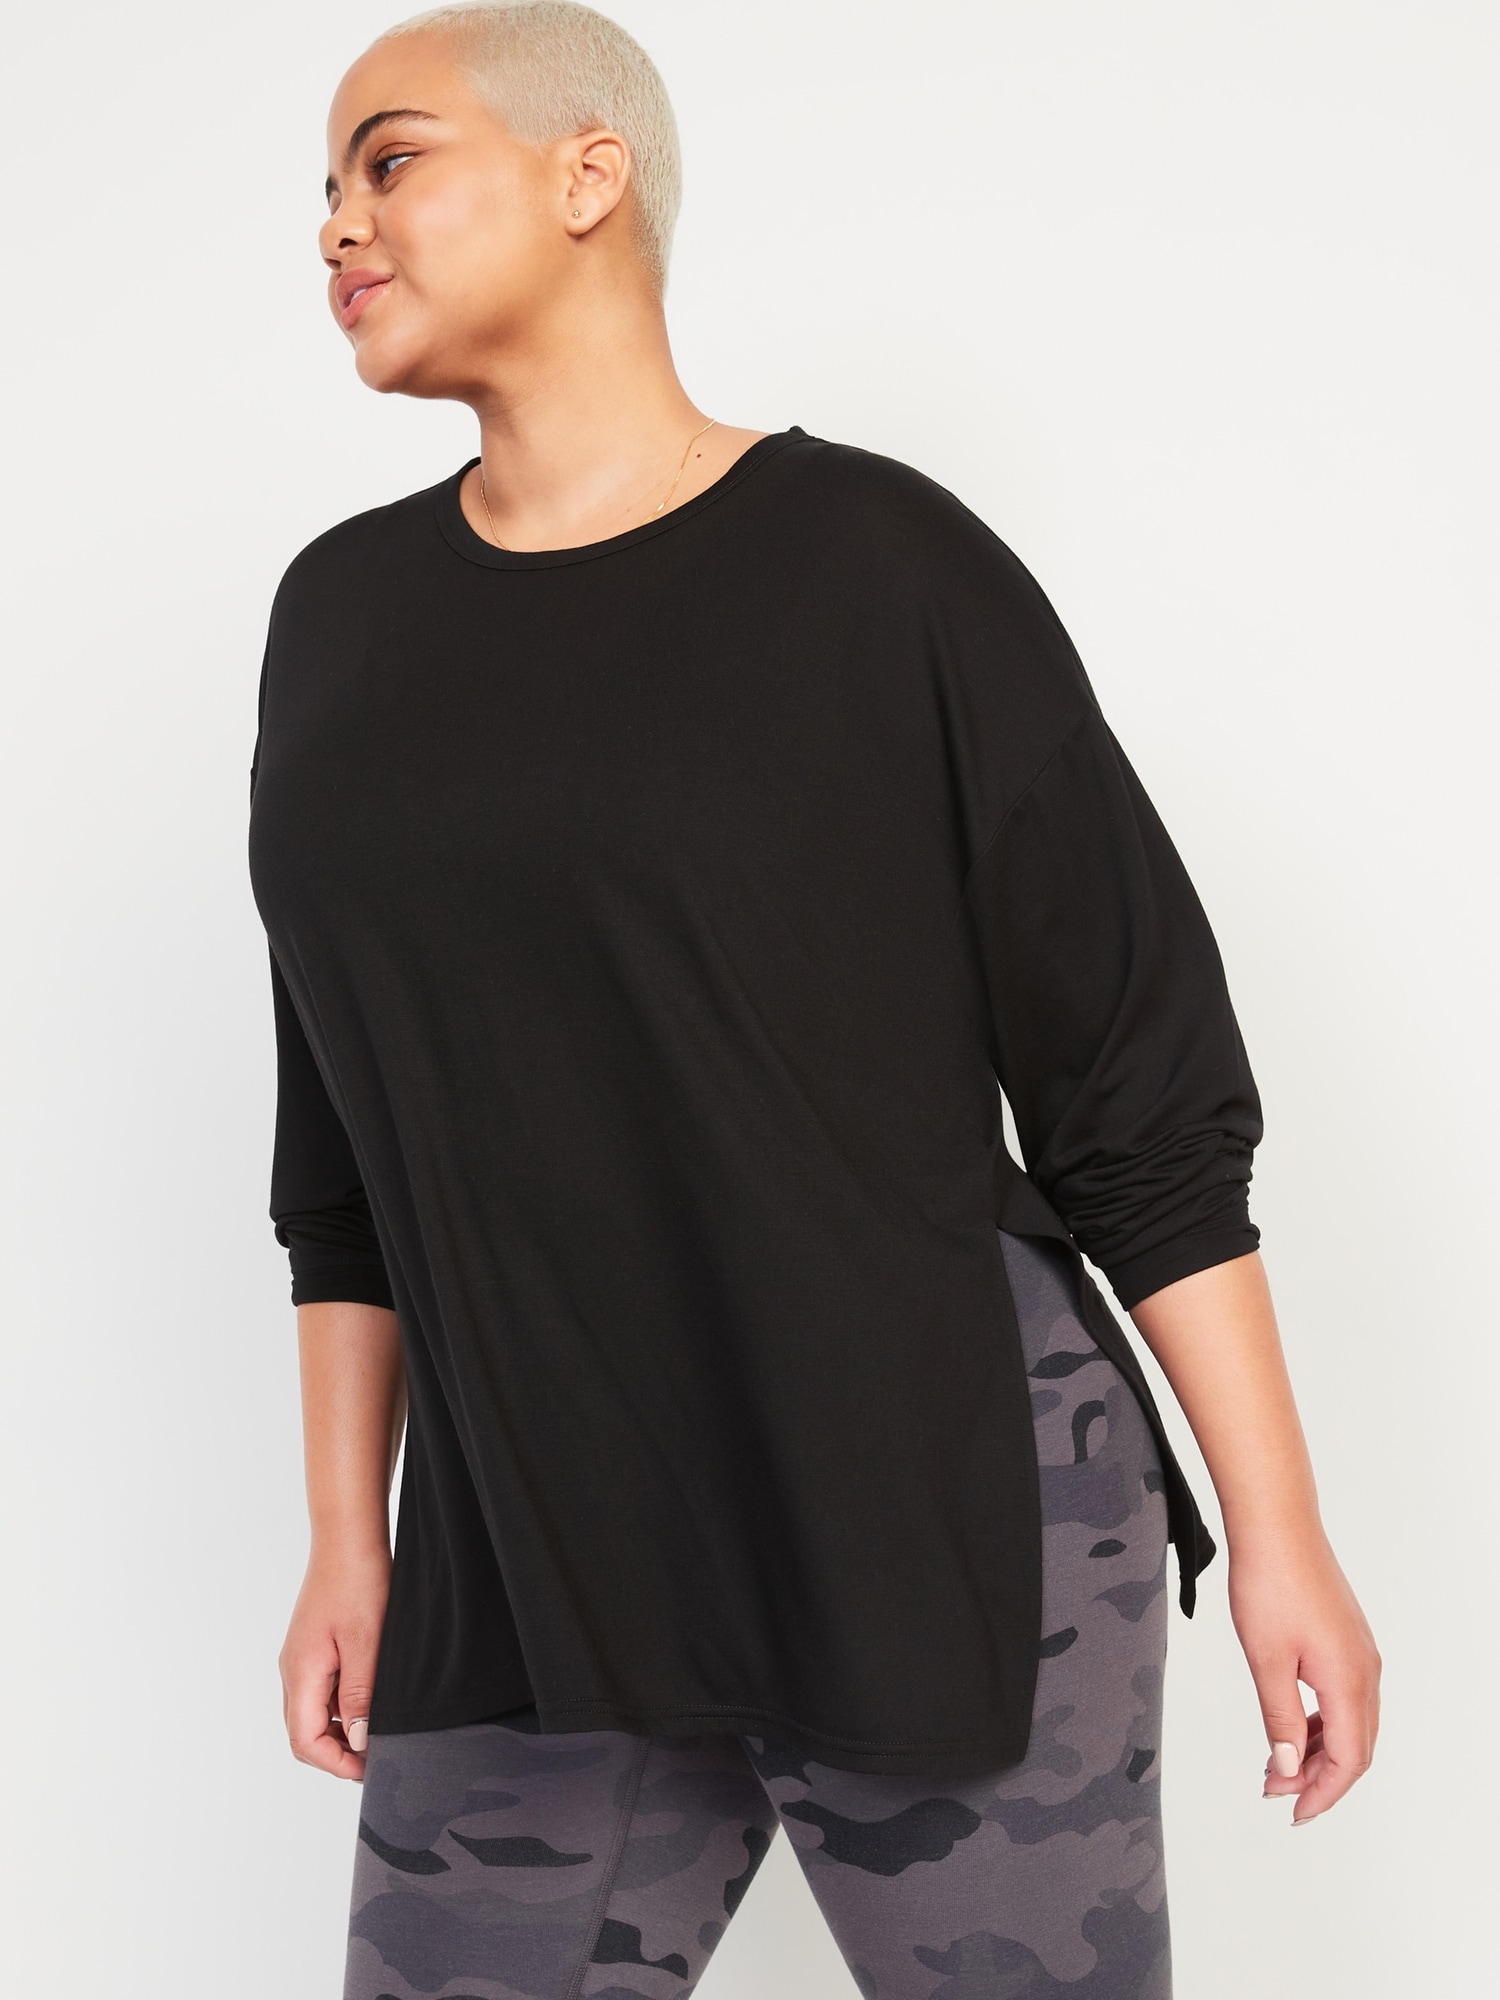 Long-Sleeve UltraLite All-Day Performance Tunic T-Shirt | Old Navy